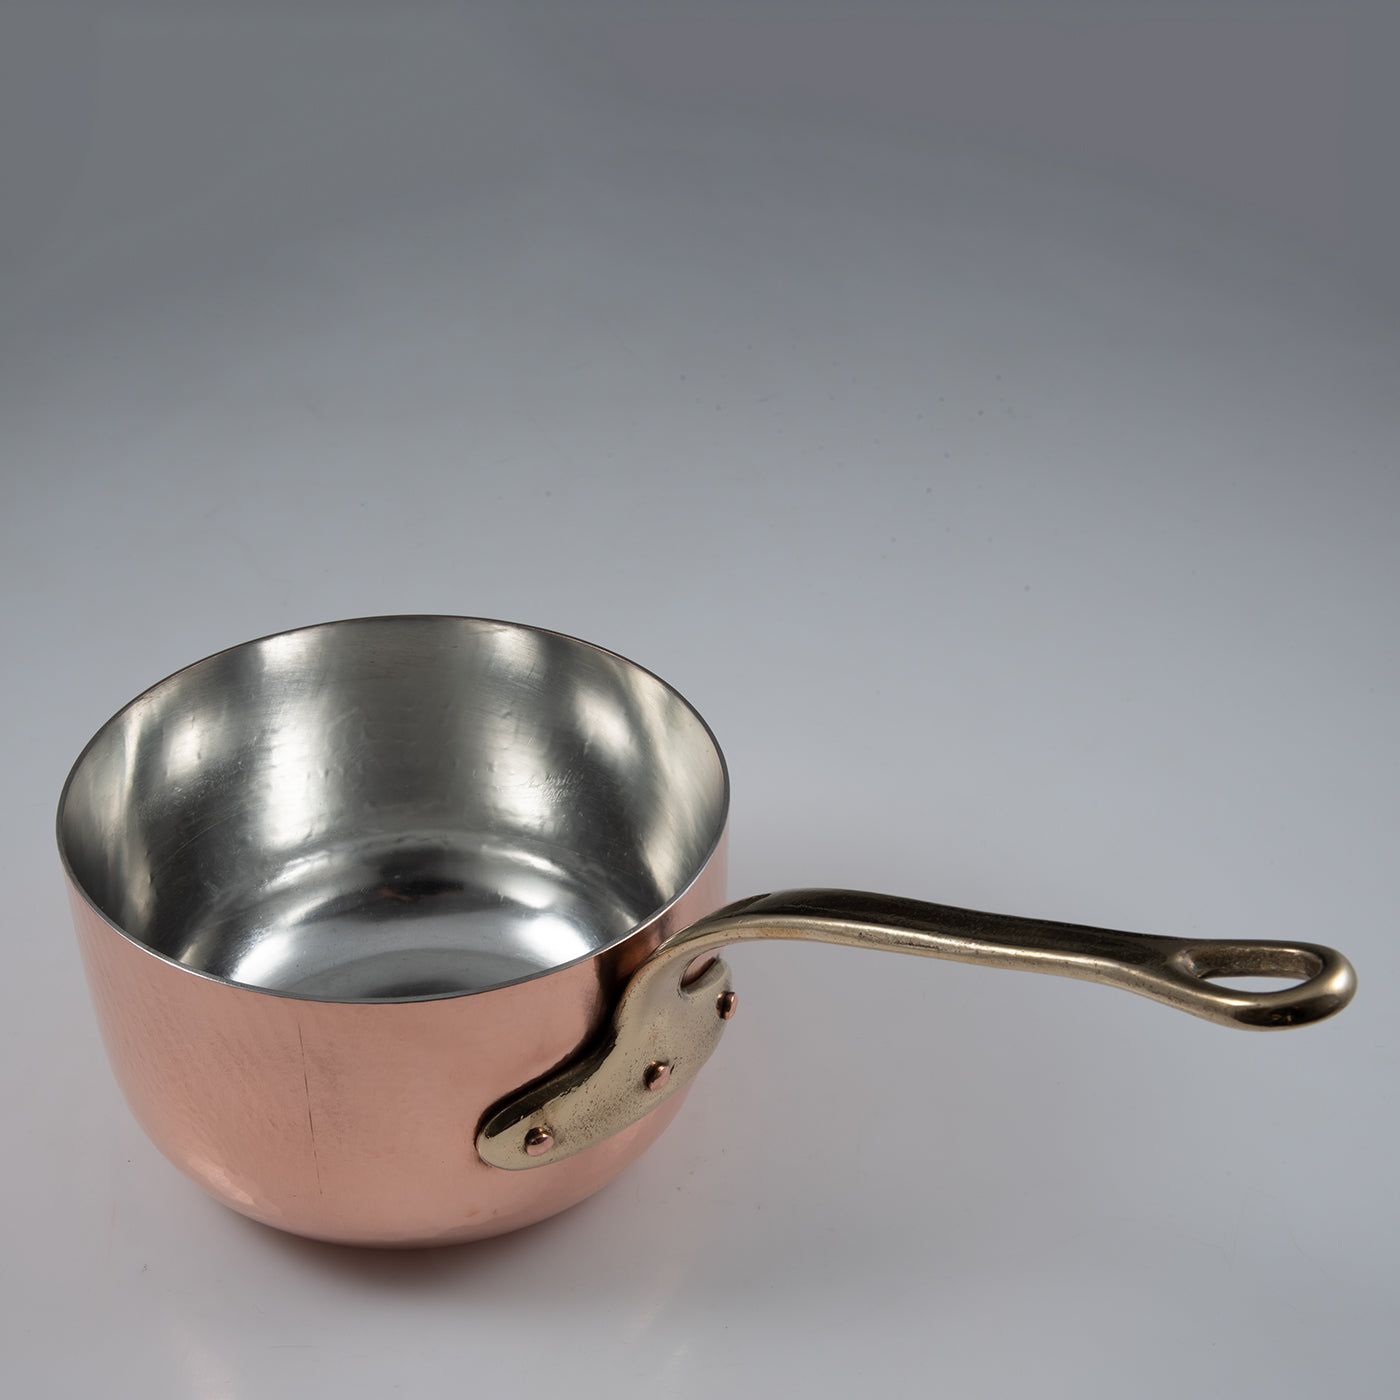 Silver lined Copper Saucepan Dish with Lid - Alternative view 2